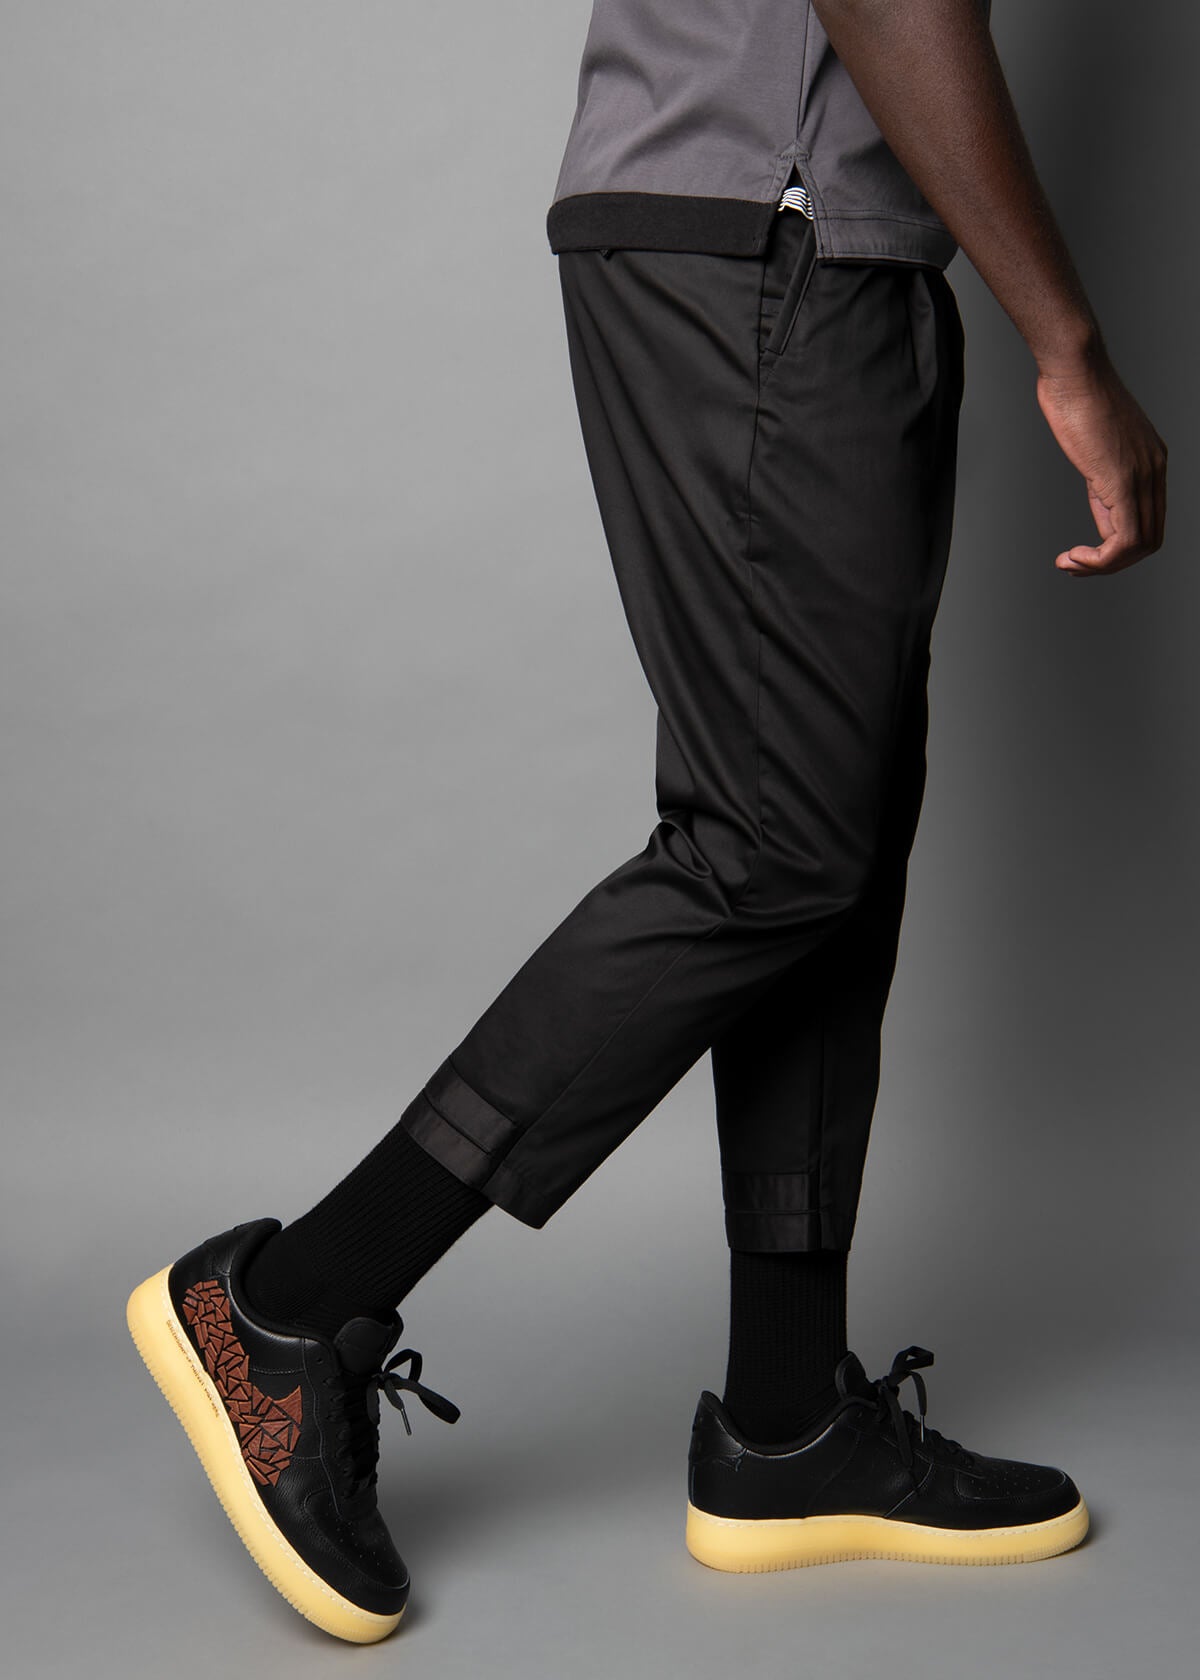 soft black chino style pants for men